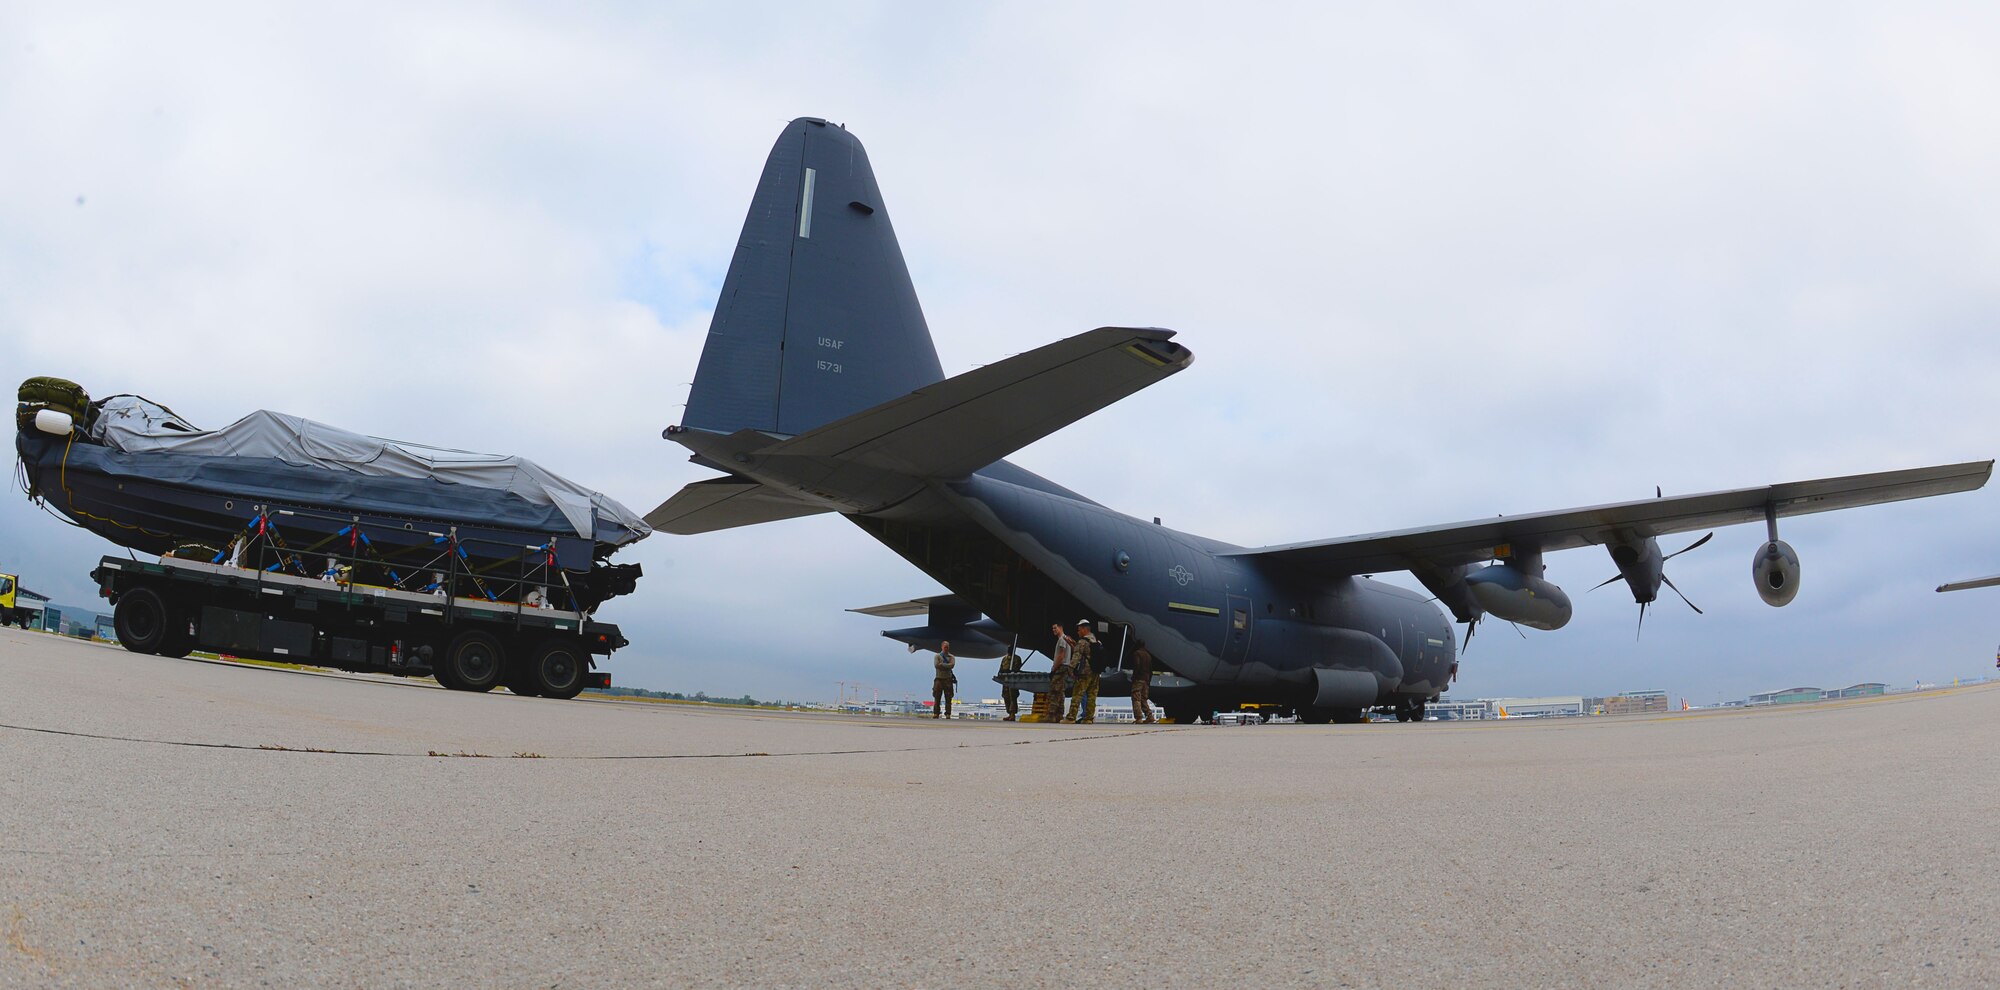 A Rigid Inflatable Boat is loaded onto an MC-130J Commando II in preparation for a Maritime Craft Aerial Delivery drop Sept. 26, 2016, at Stuttgart Air Base, Germany. Two of three MC-130J Commando IIs from the 67th Special Operations Squadron were loaded for MCADS drops in participation with the 2016 Night Hawk exercise. (U.S. Air Force photo by Senior Airman Justine Rho) 